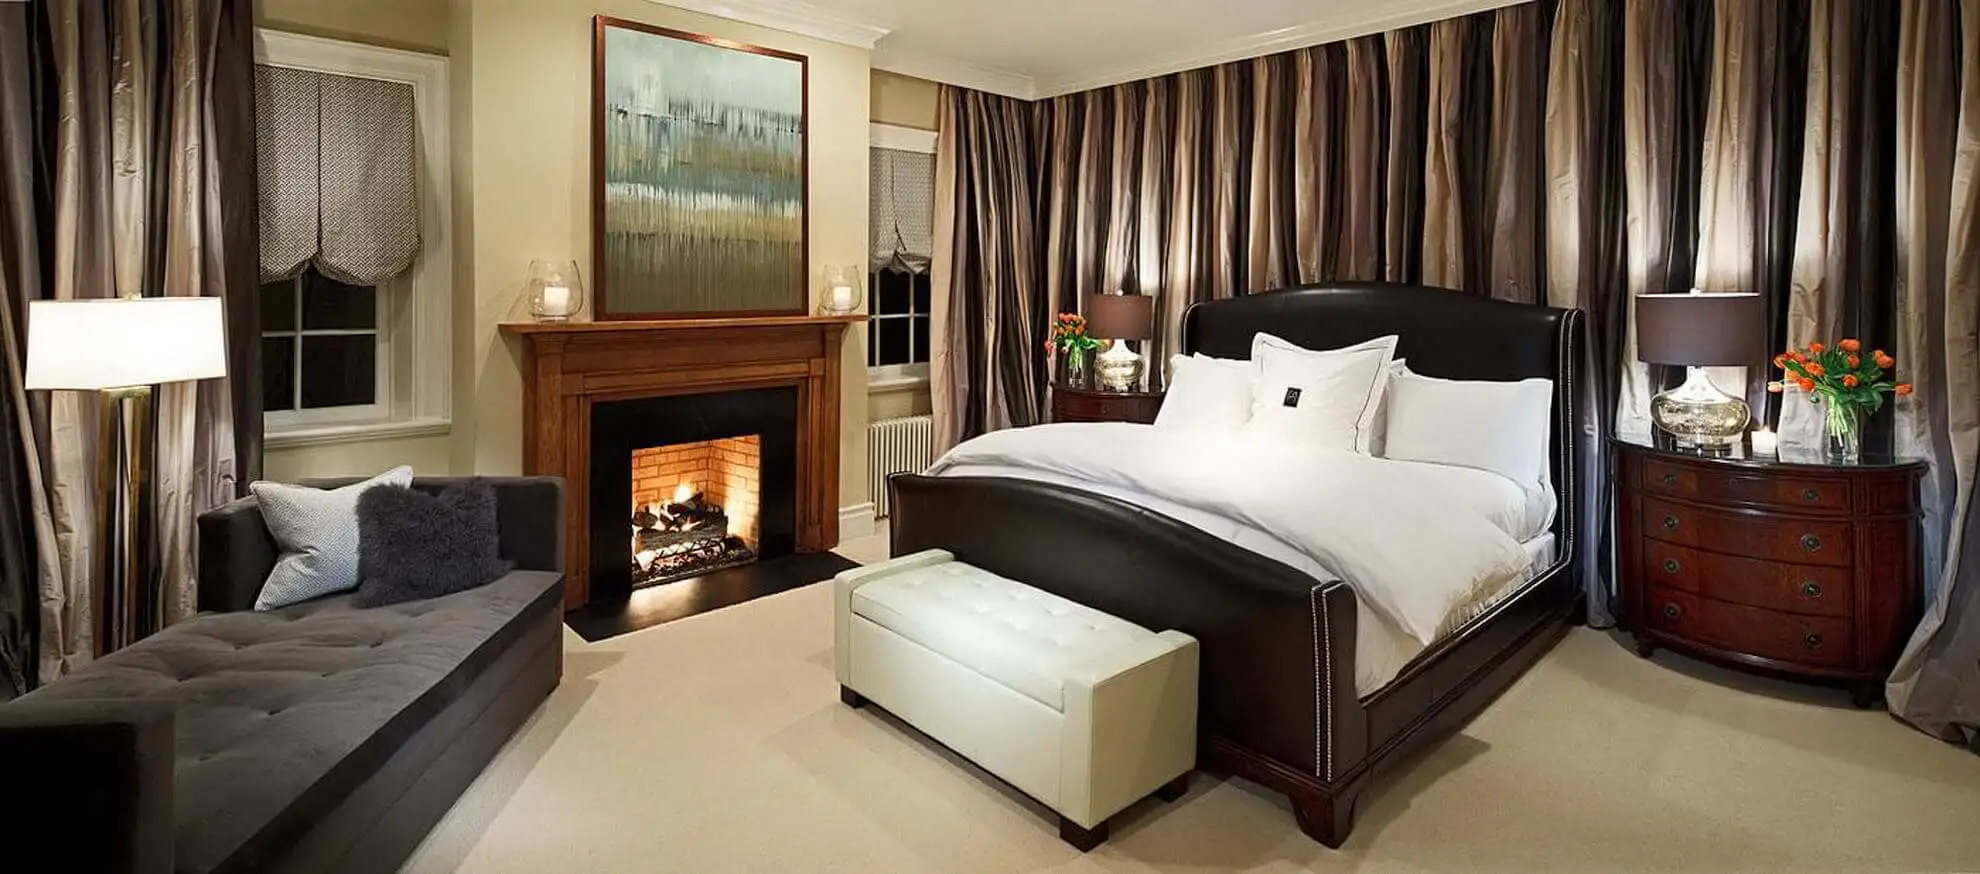 Cozy Up Your Master Bedroom With a Fireplace